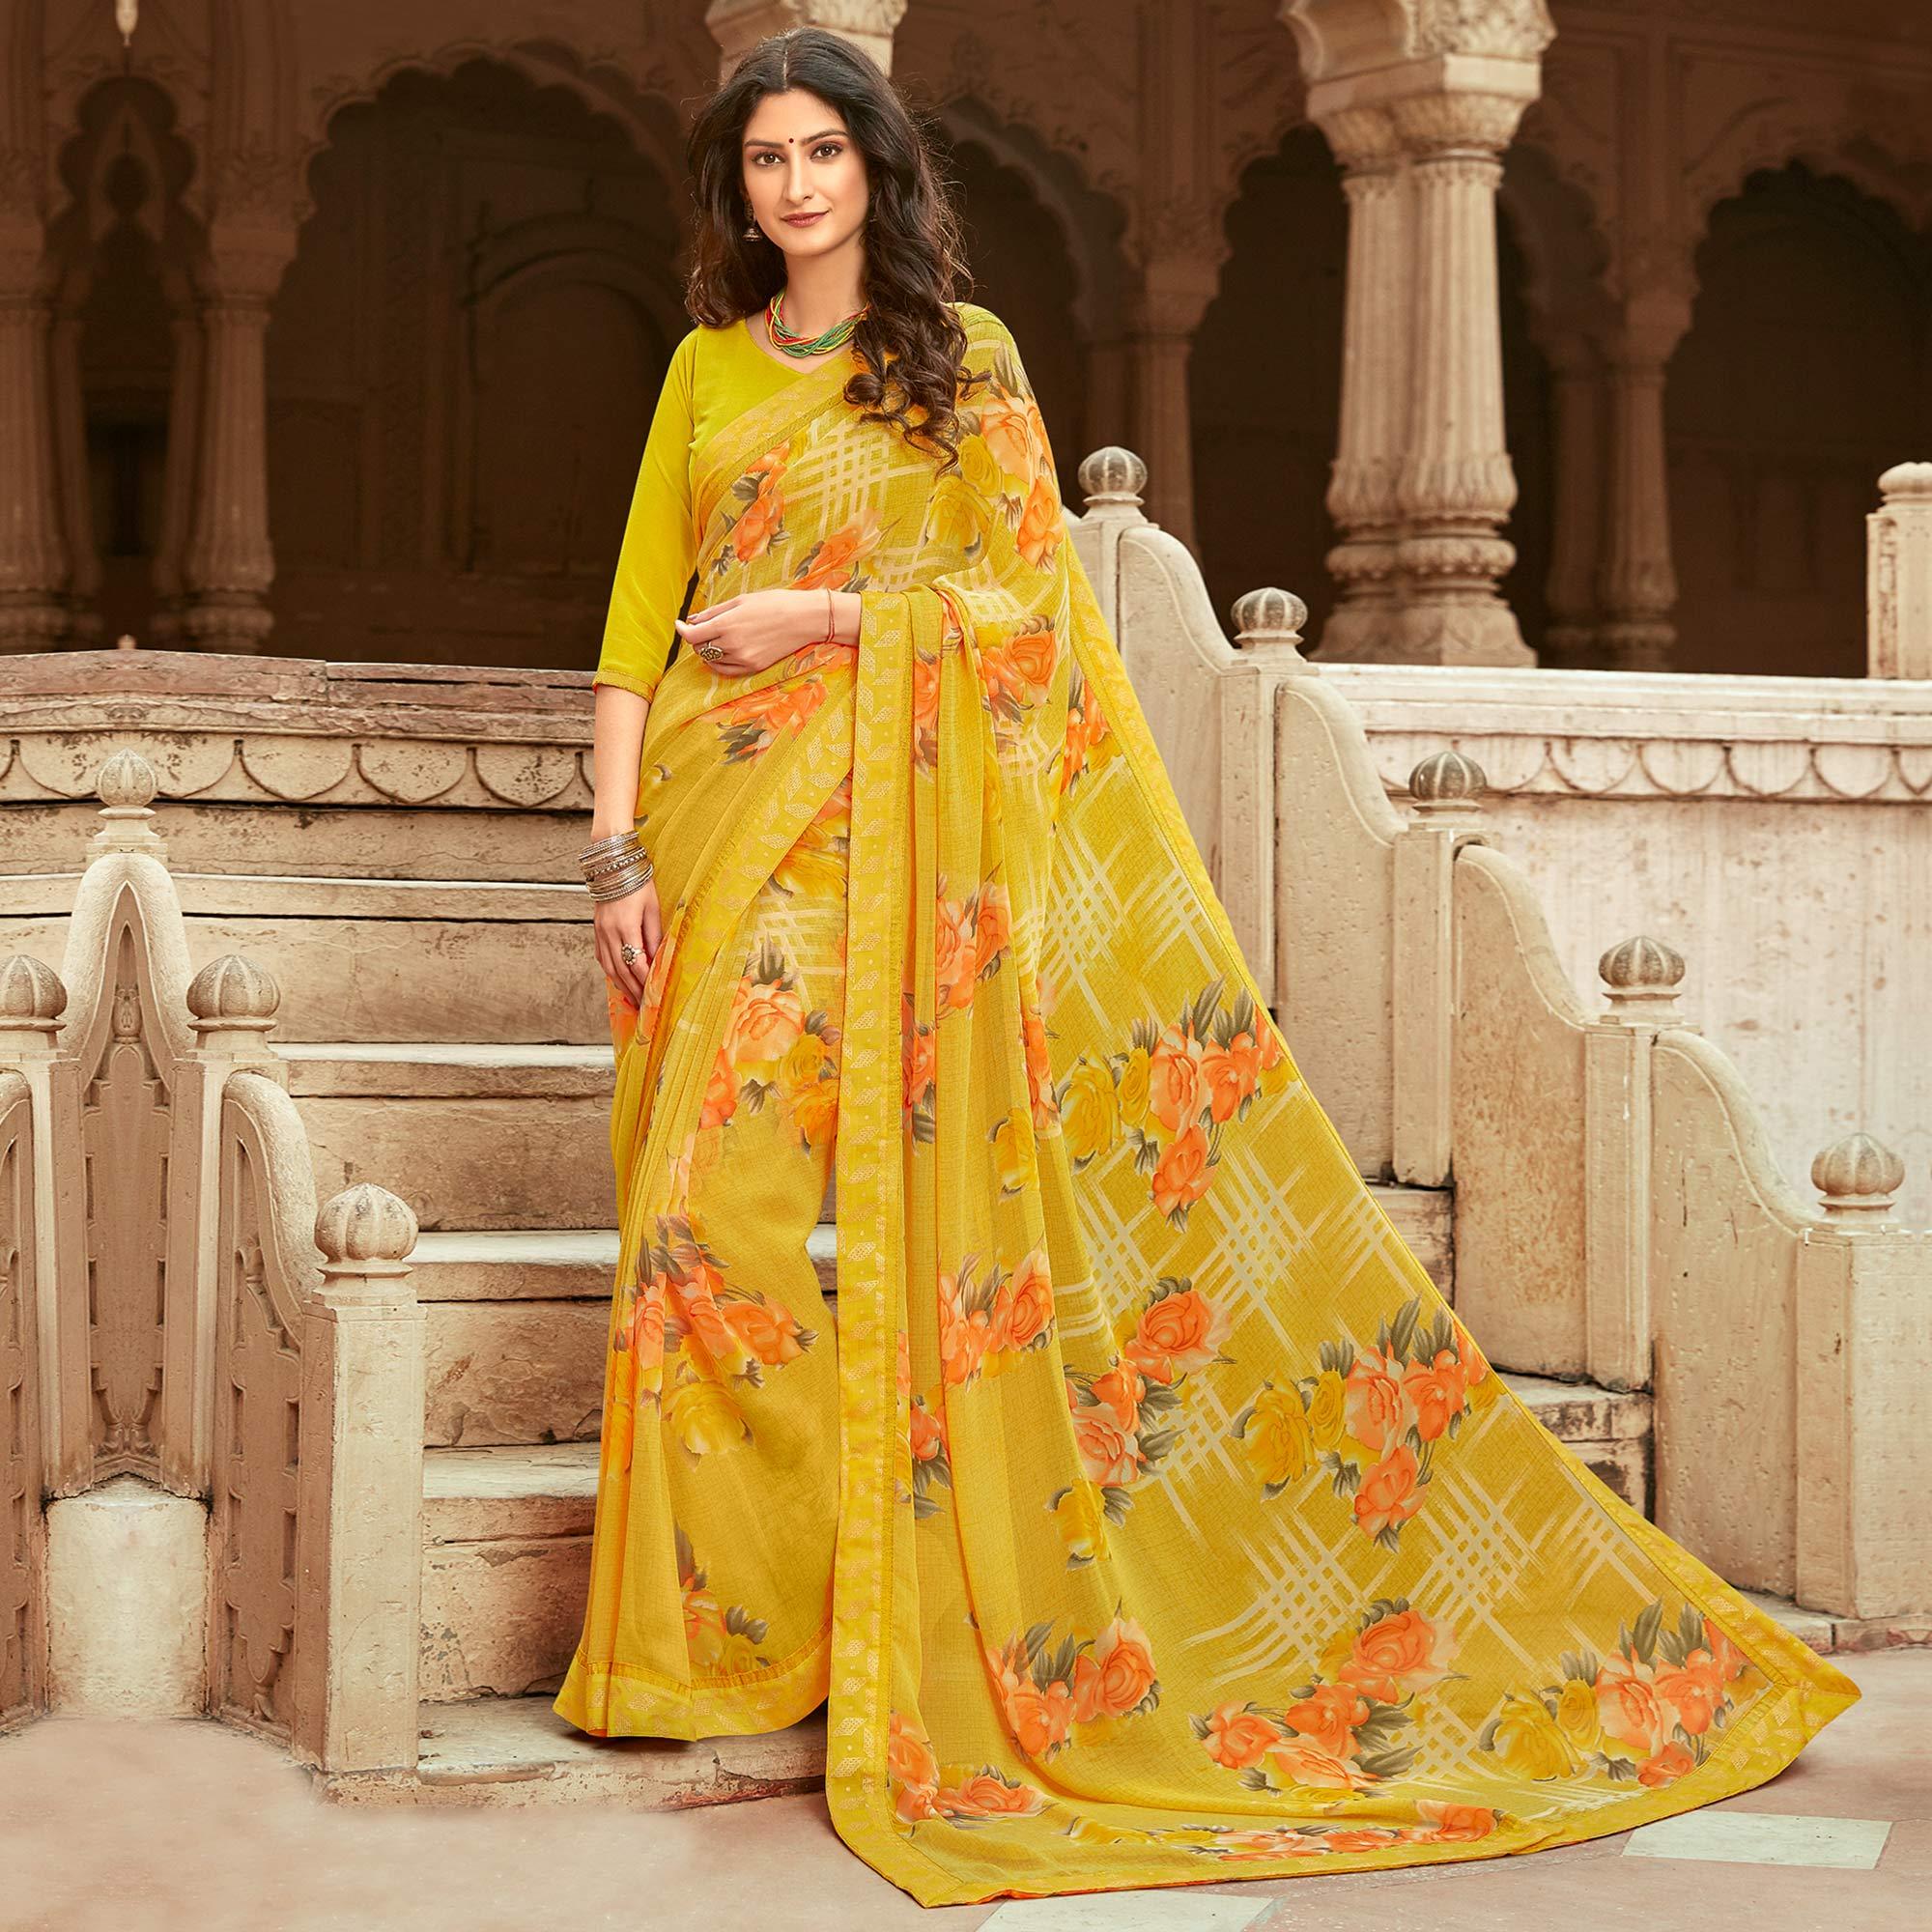 Groovy Yellow Colored Casual Floral Printed Georgette Saree - Peachmode